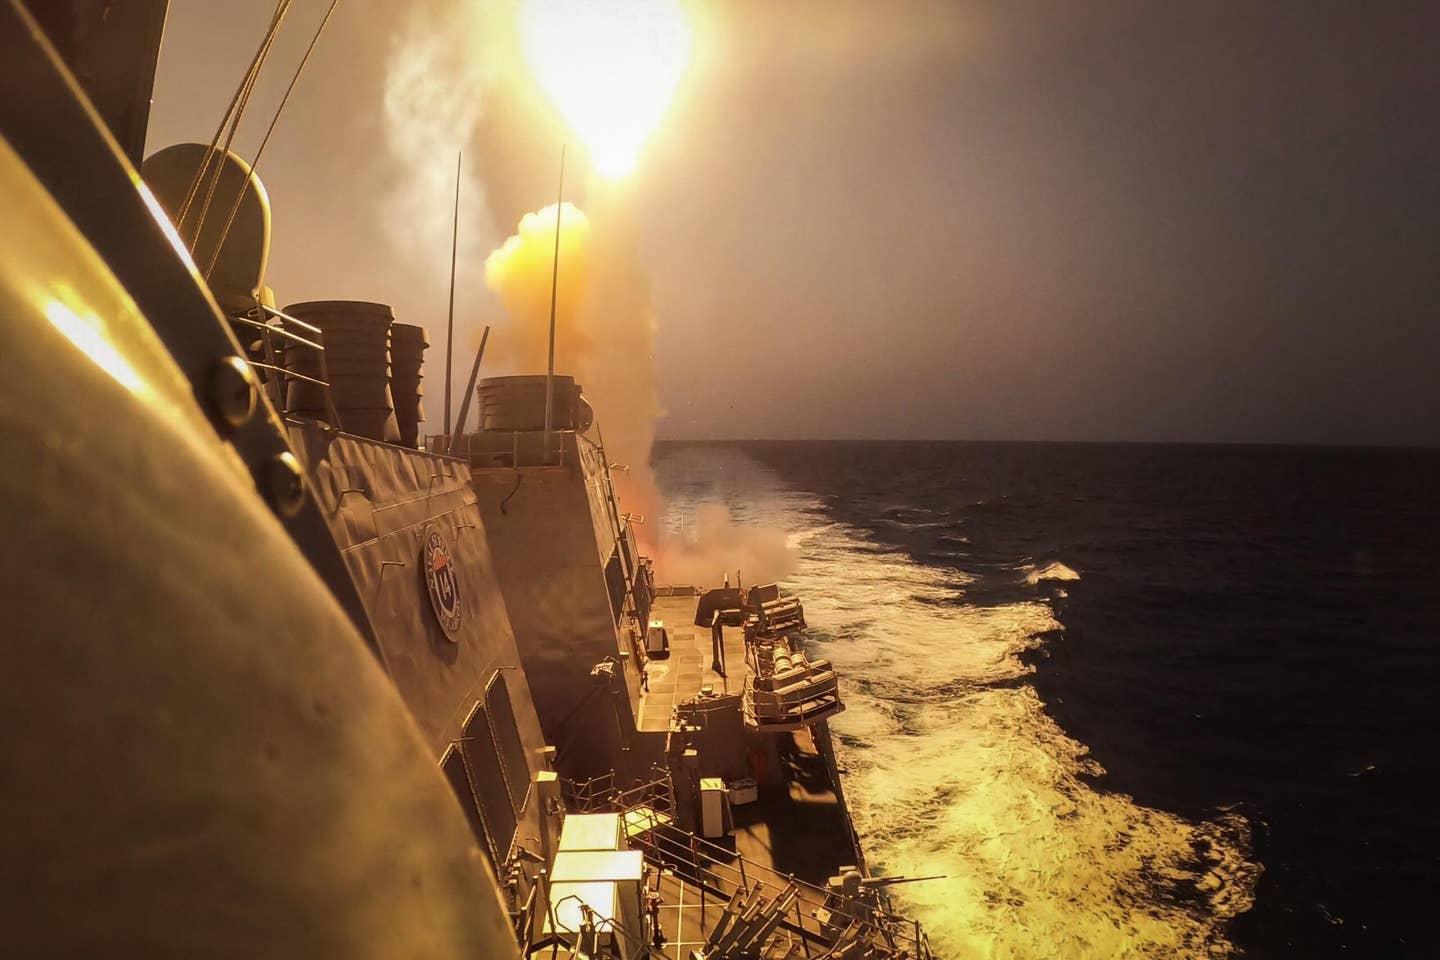 The <em>Arleigh Burke</em>-class guided-missile destroyer USS <em>Carney</em> (DDG 64) defeats a combination of Houthi missiles and unmanned aerial vehicles in the Red Sea, Oct. 19, 2023. <em>Carney</em> is deployed to the U.S. 5th Fleet area of operations to help ensure maritime security and stability in the Middle East region. (U.S. Navy photo by Mass Communication Specialist 2nd Class Aaron Lau)